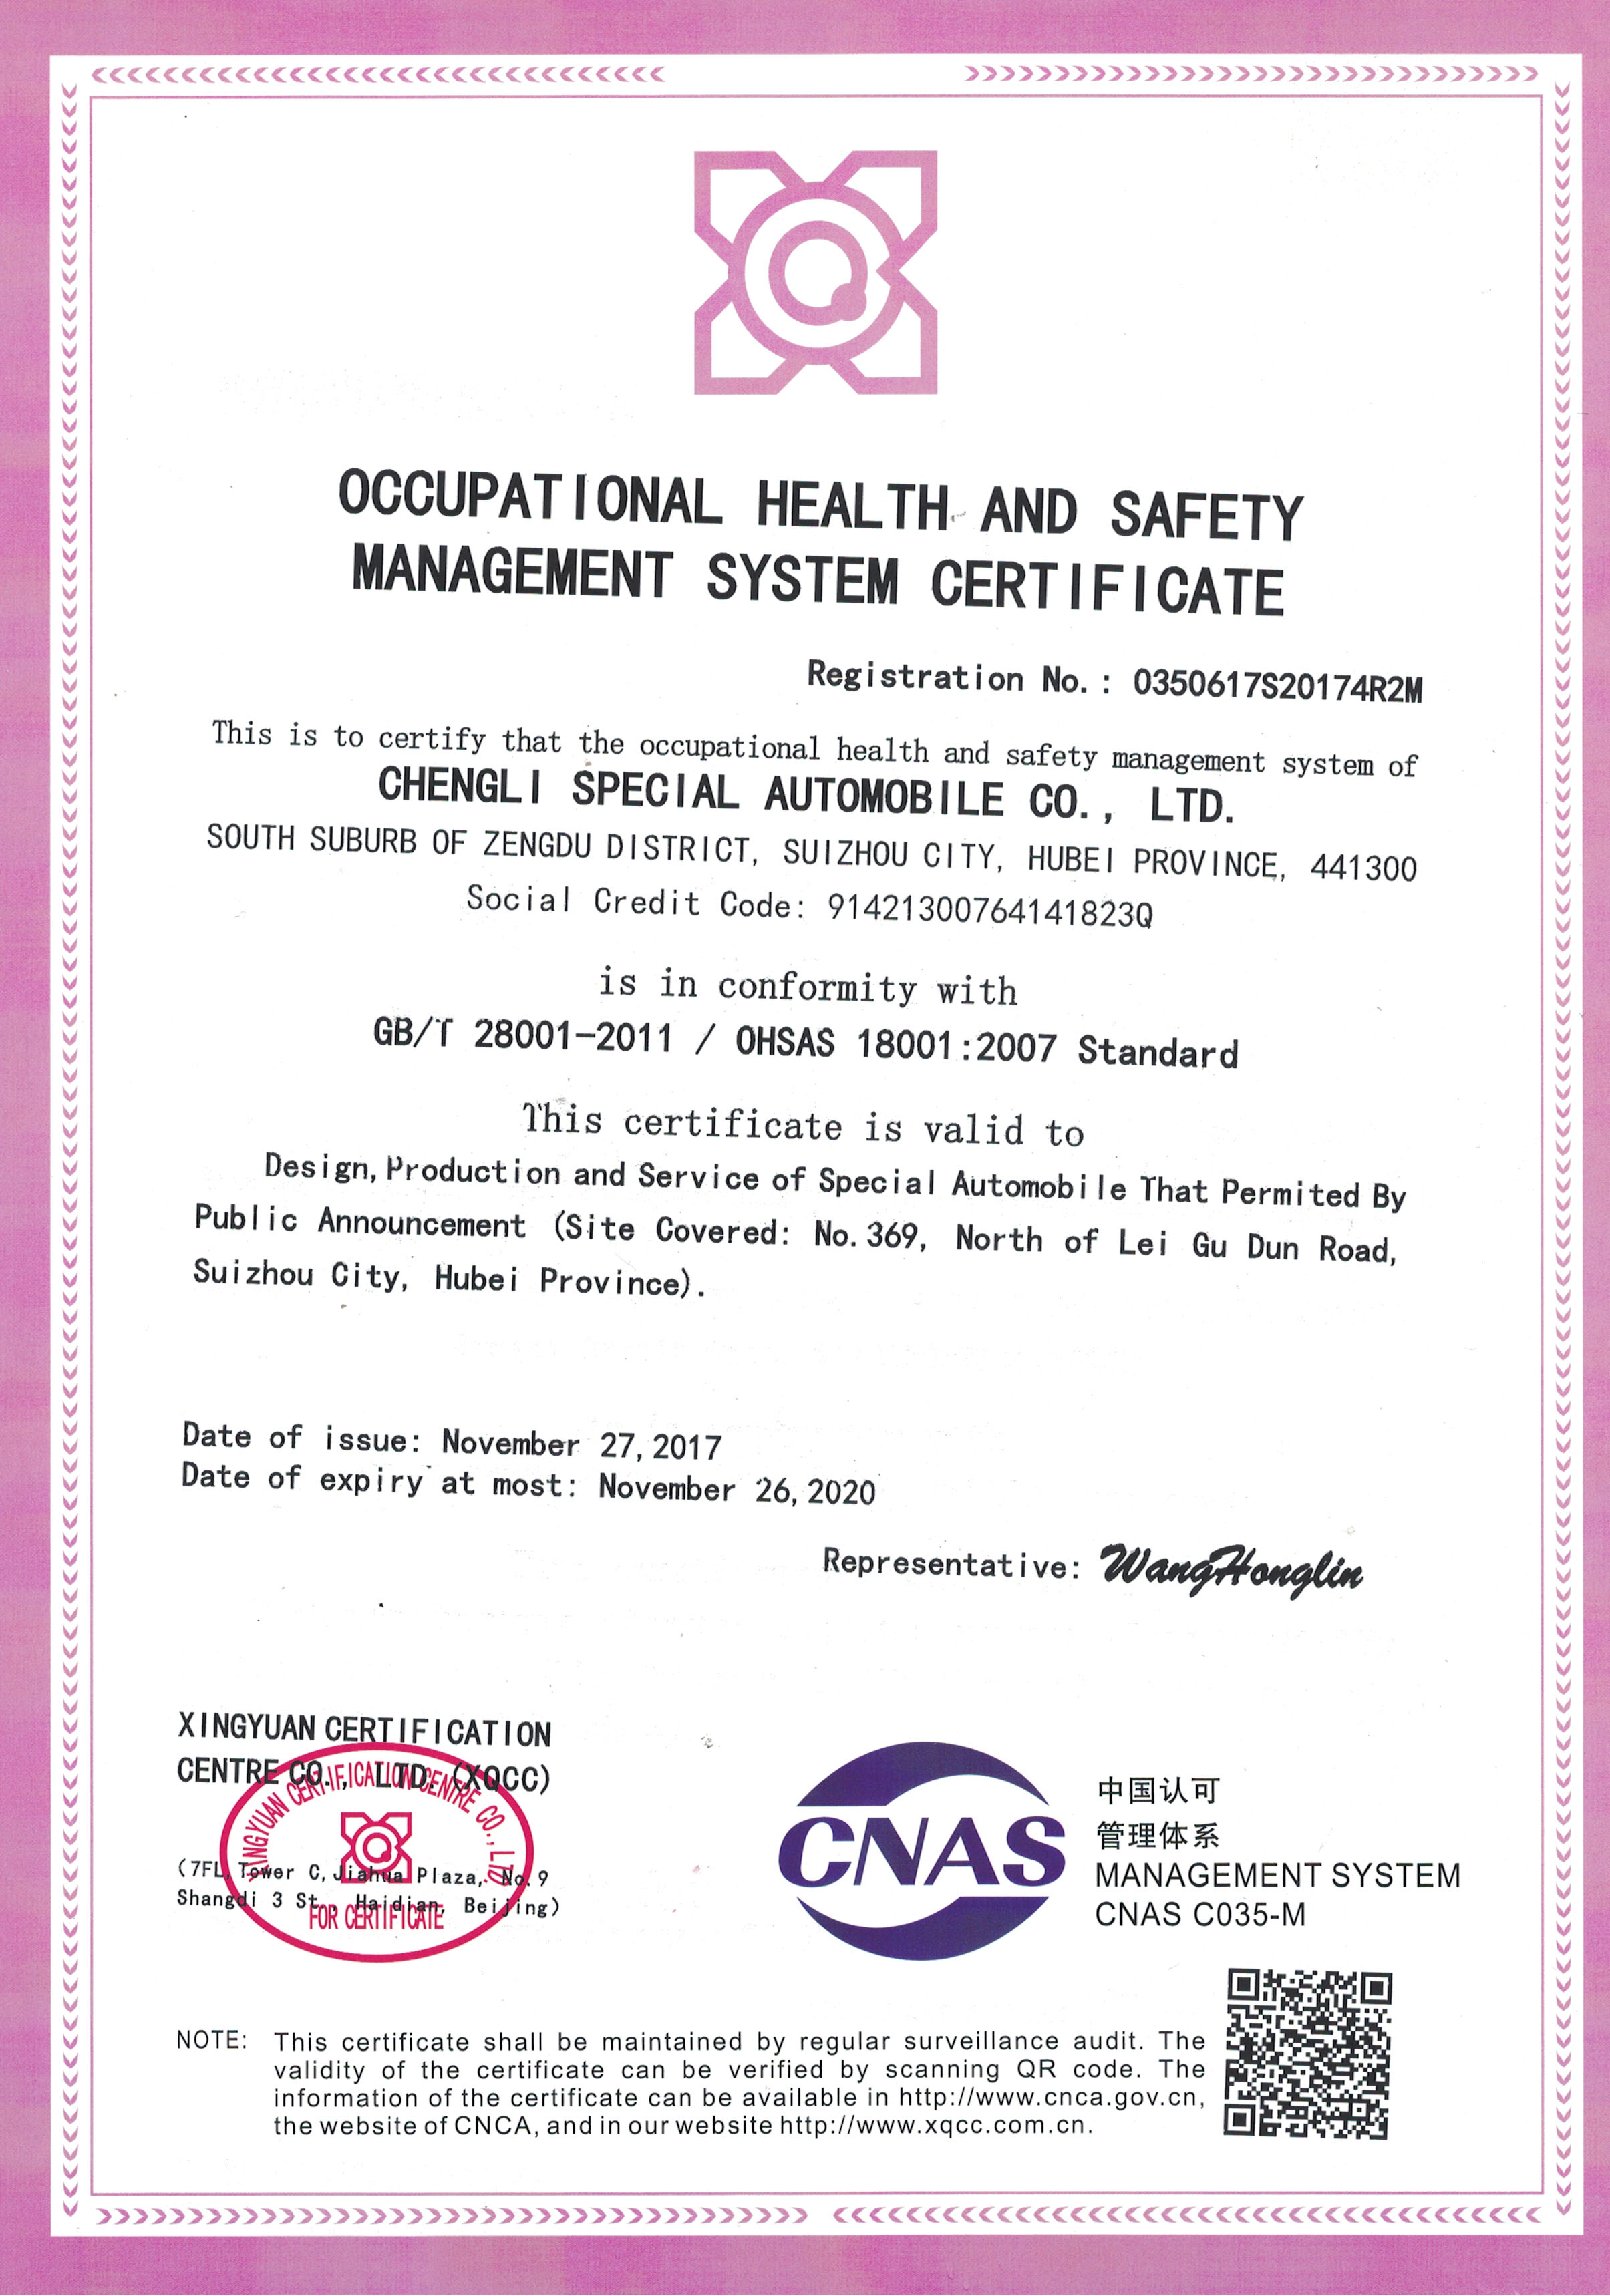 OCCUPATIONAL HEALTH AND SAFETY CERTIFICATE